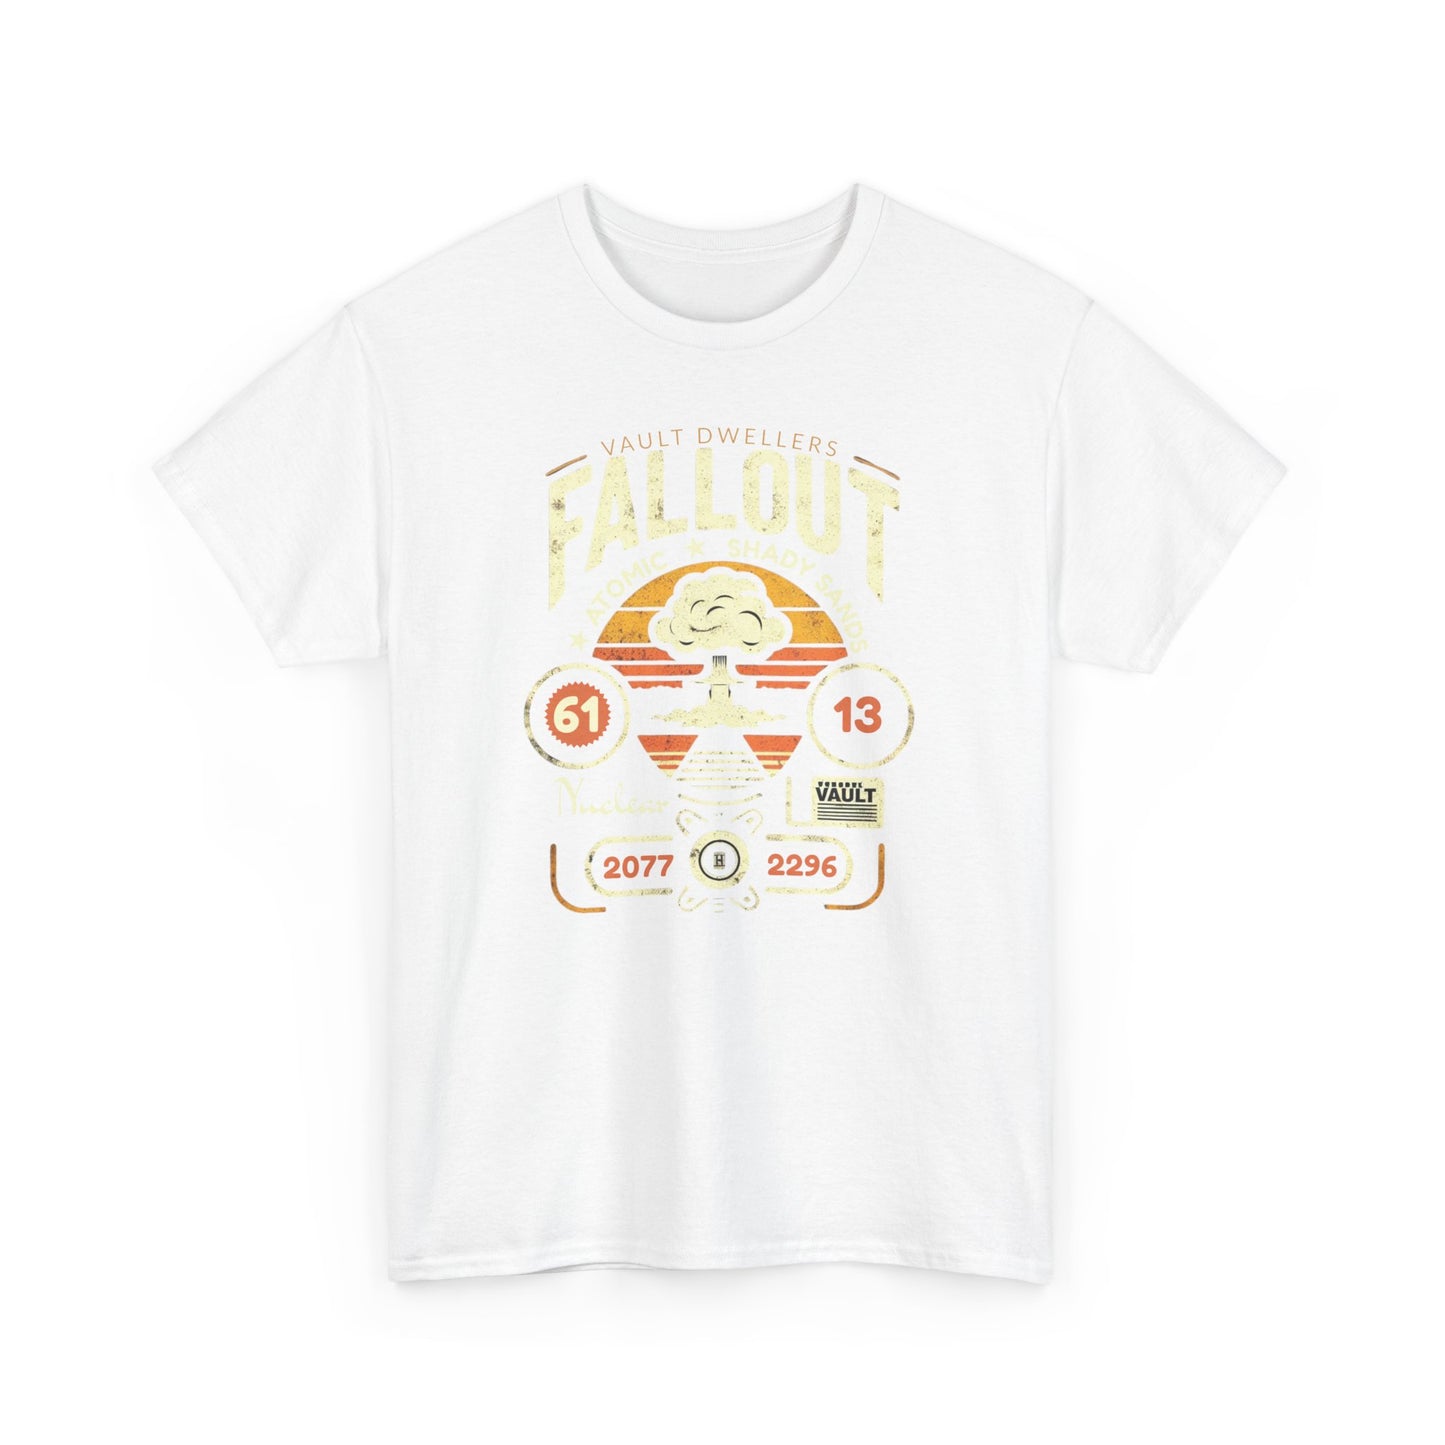 Nuclear Nostalgia, the fallout: Unisex Graphic Tee